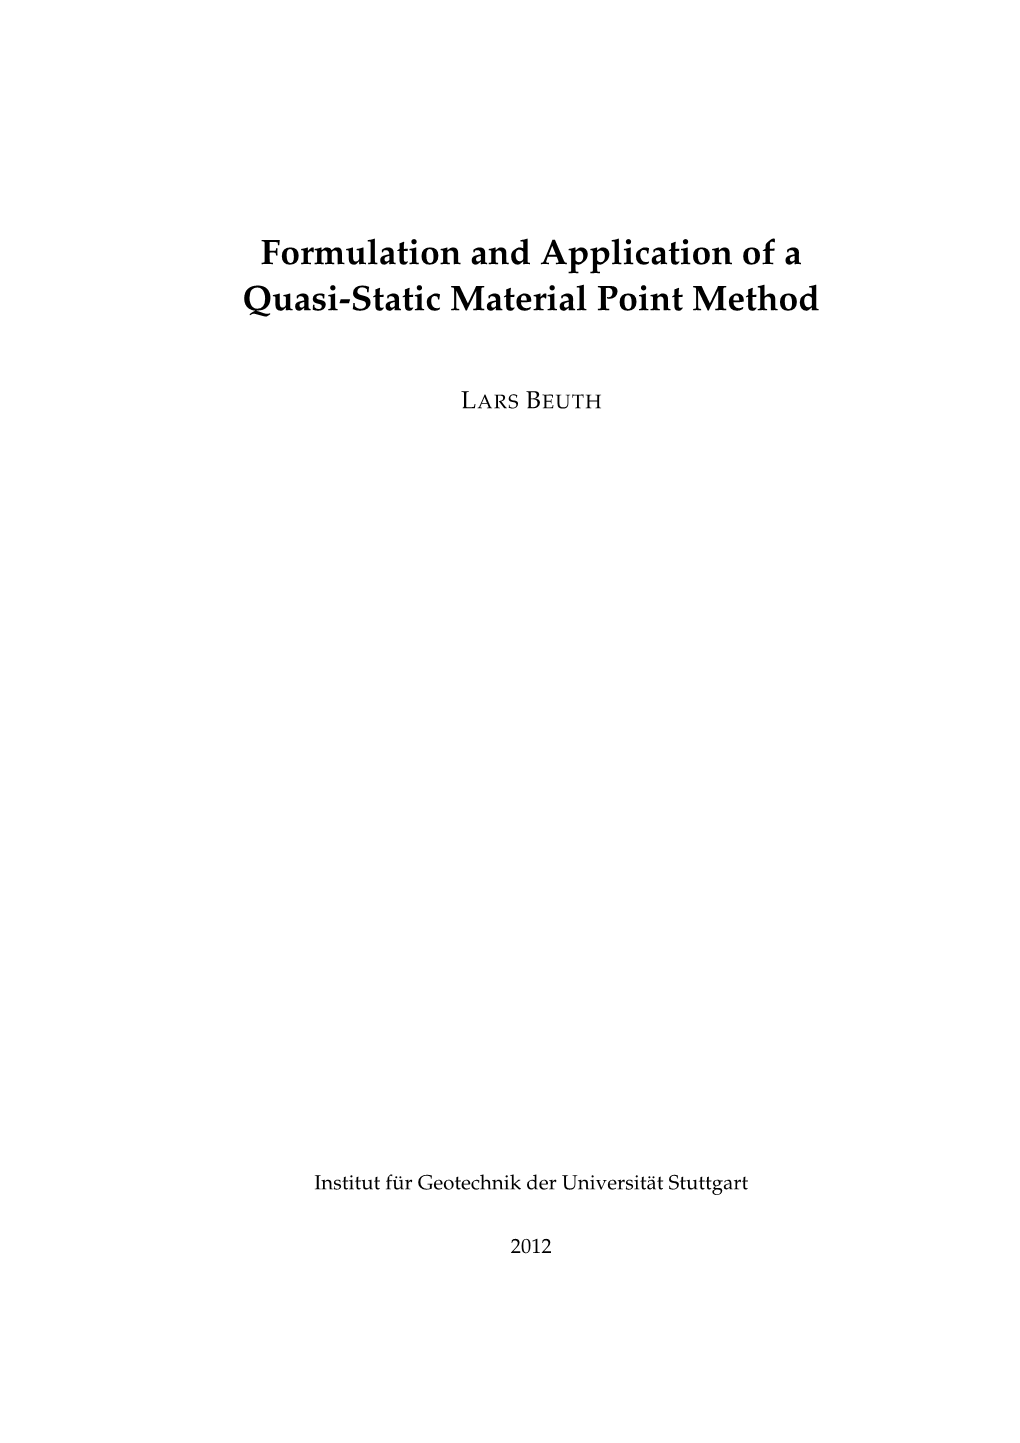 Formulation and Application of a Quasi-Static Material Point Method